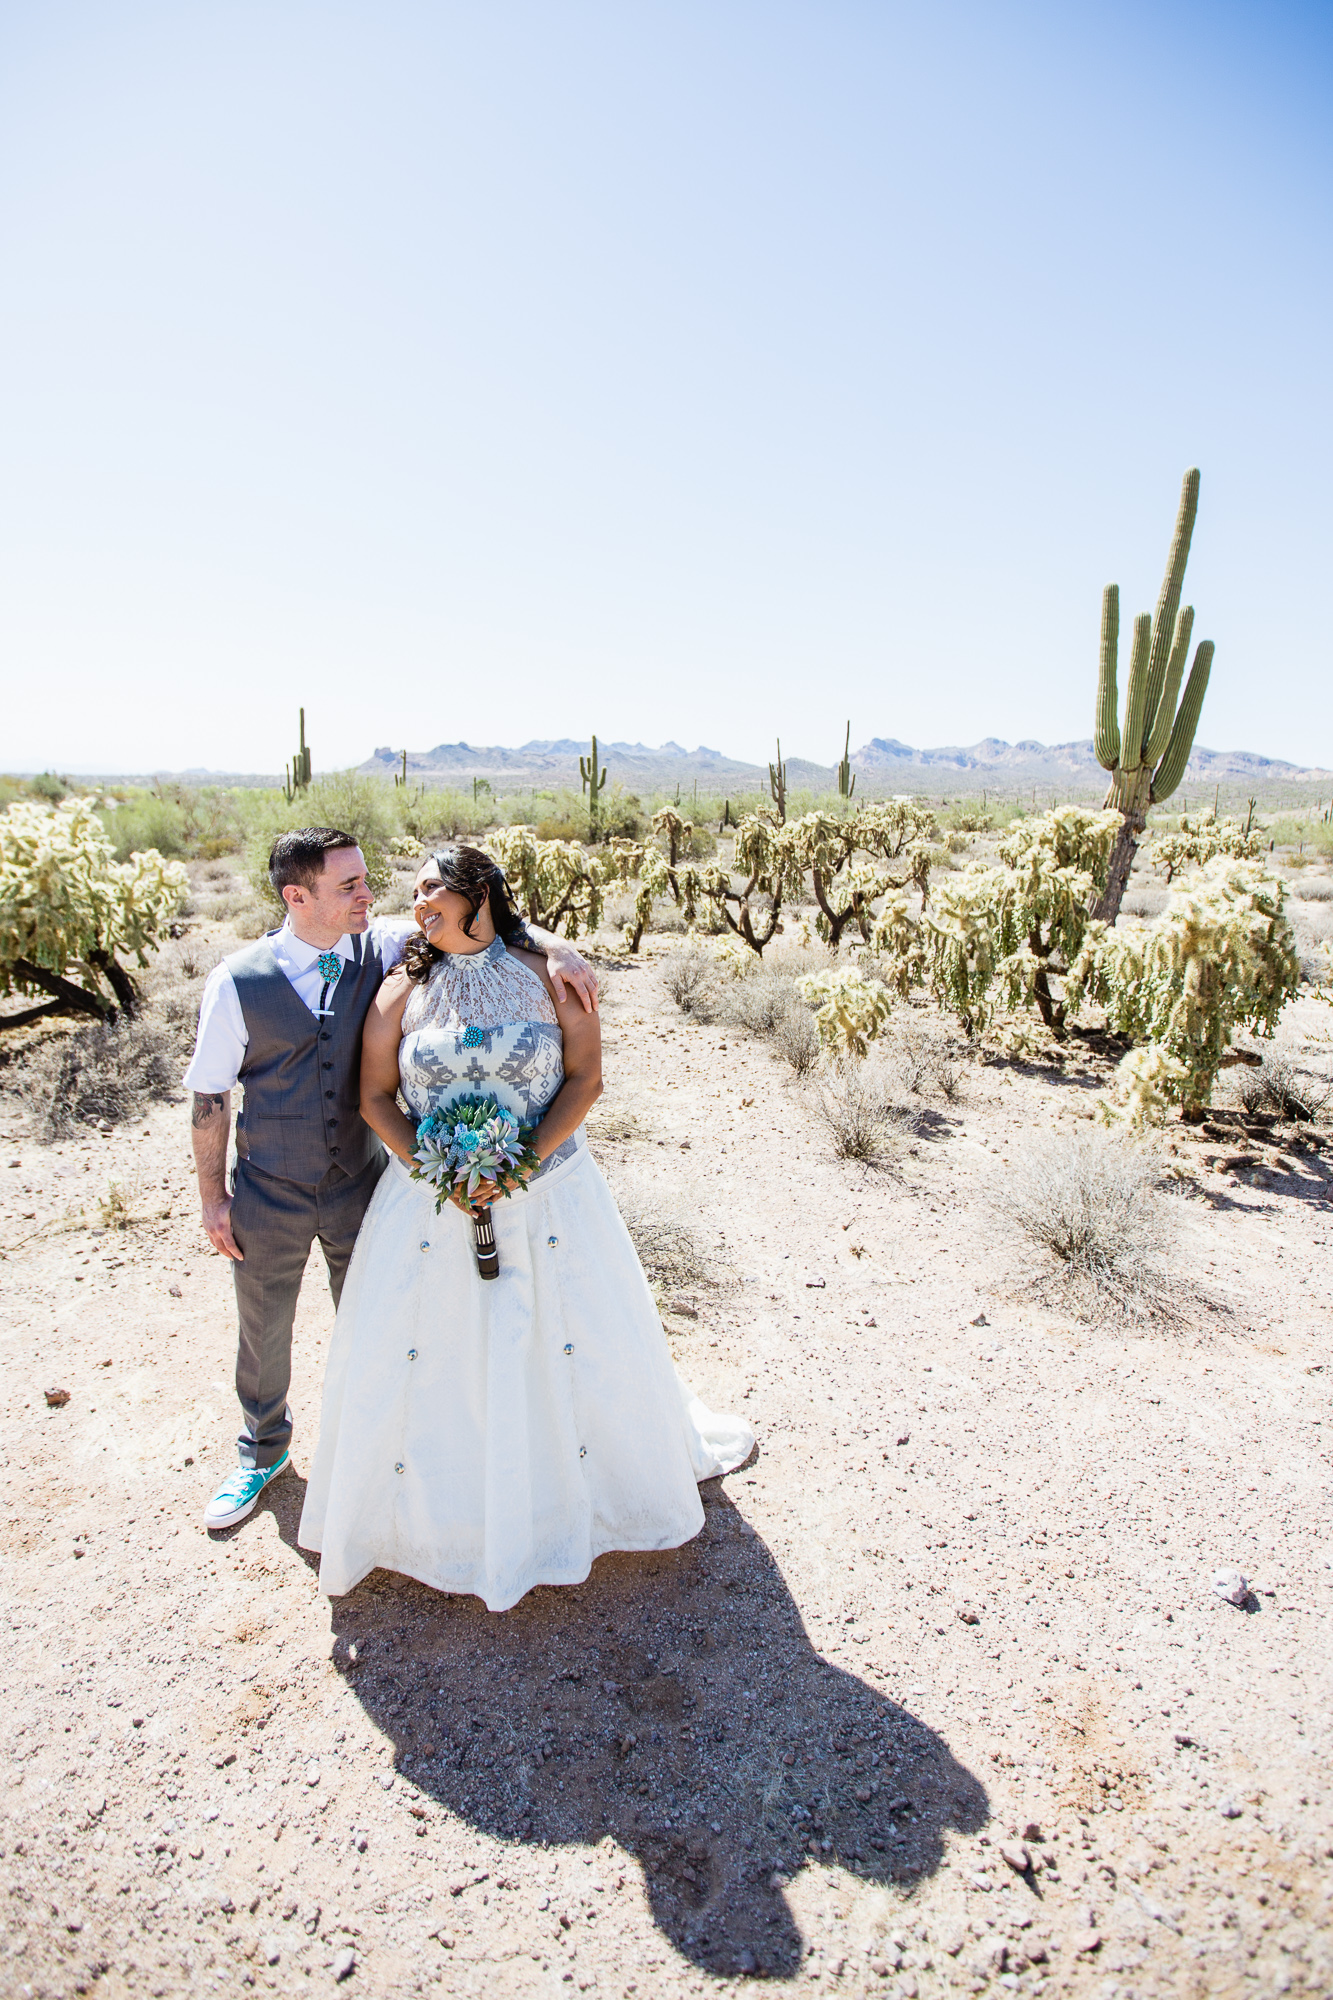 Bride and groom in turquoise and grey wedding attire in the Arizona desert at Lost Dutchman State Park by wedding photographers PMA Photography.